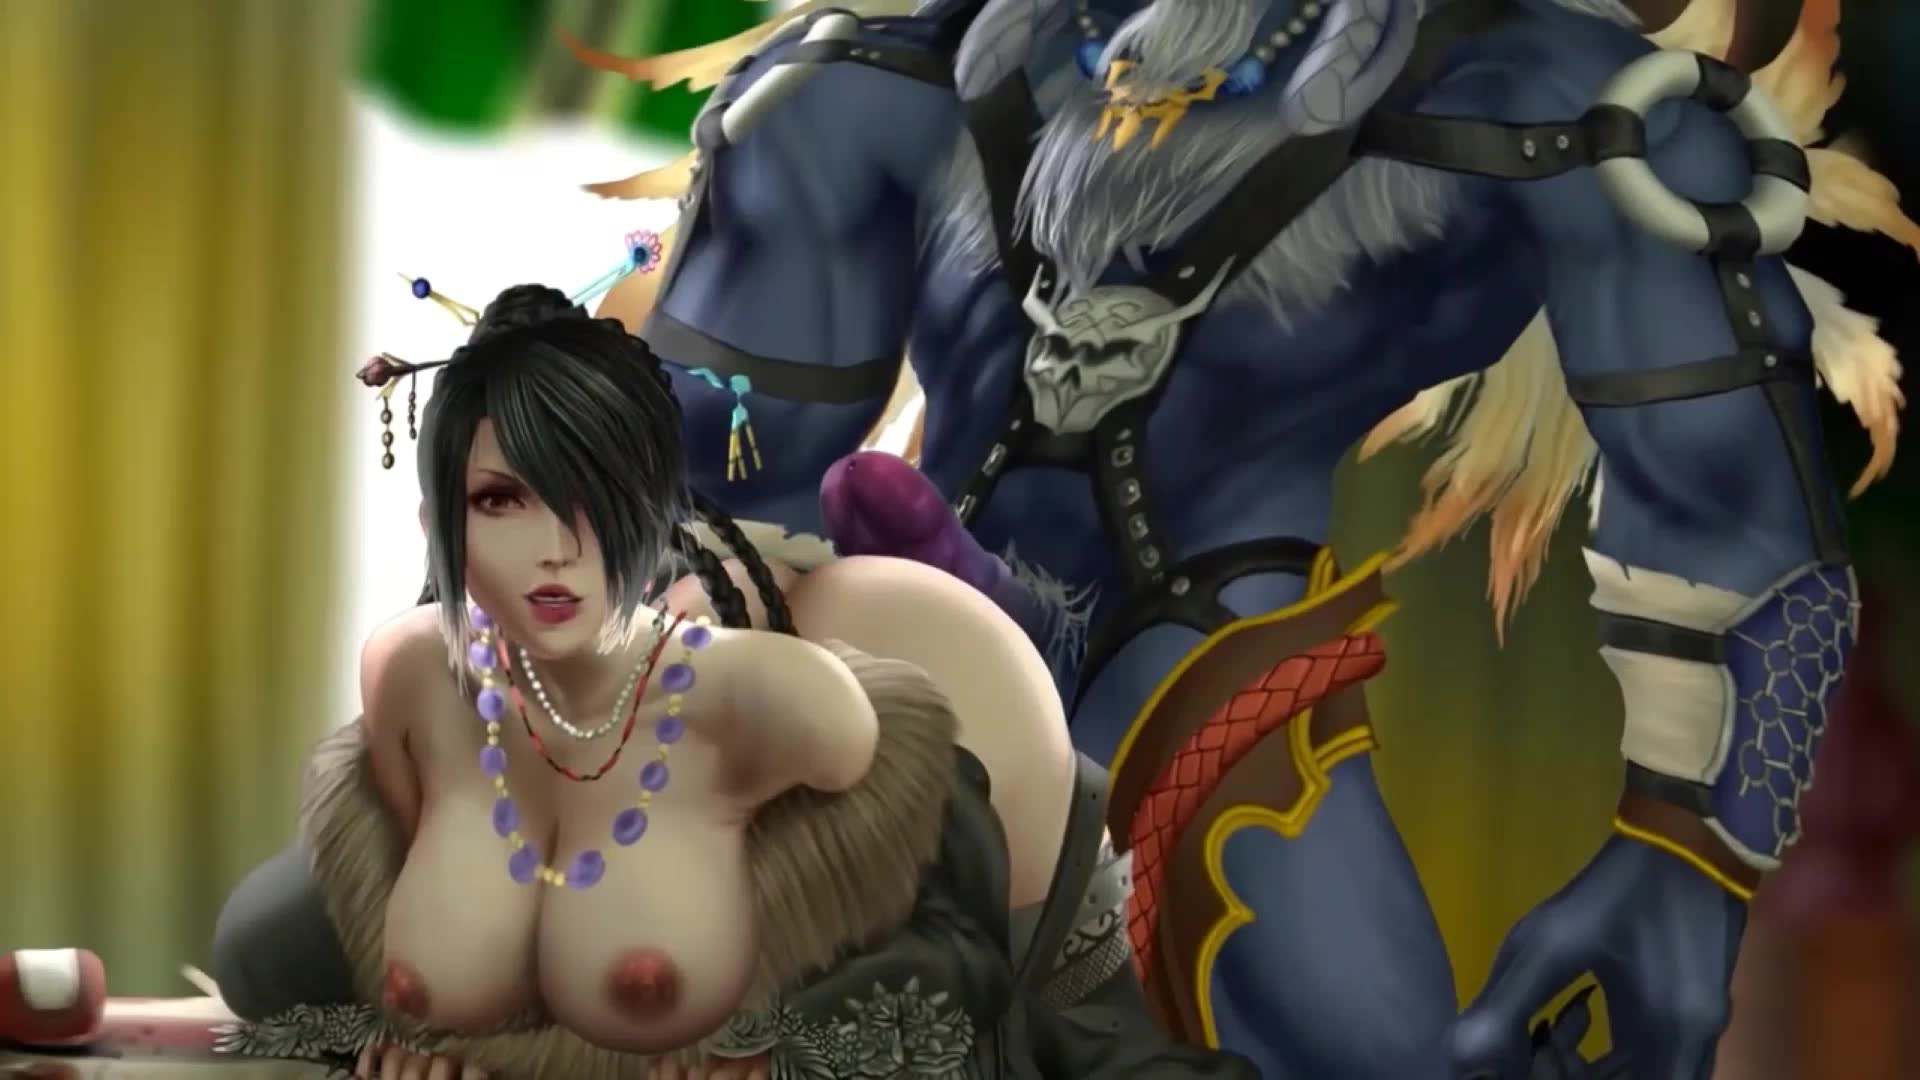 Lulu Gets Big Dick From Behind  By Kimahri – Final Fantasy NSFW animation thumbnail